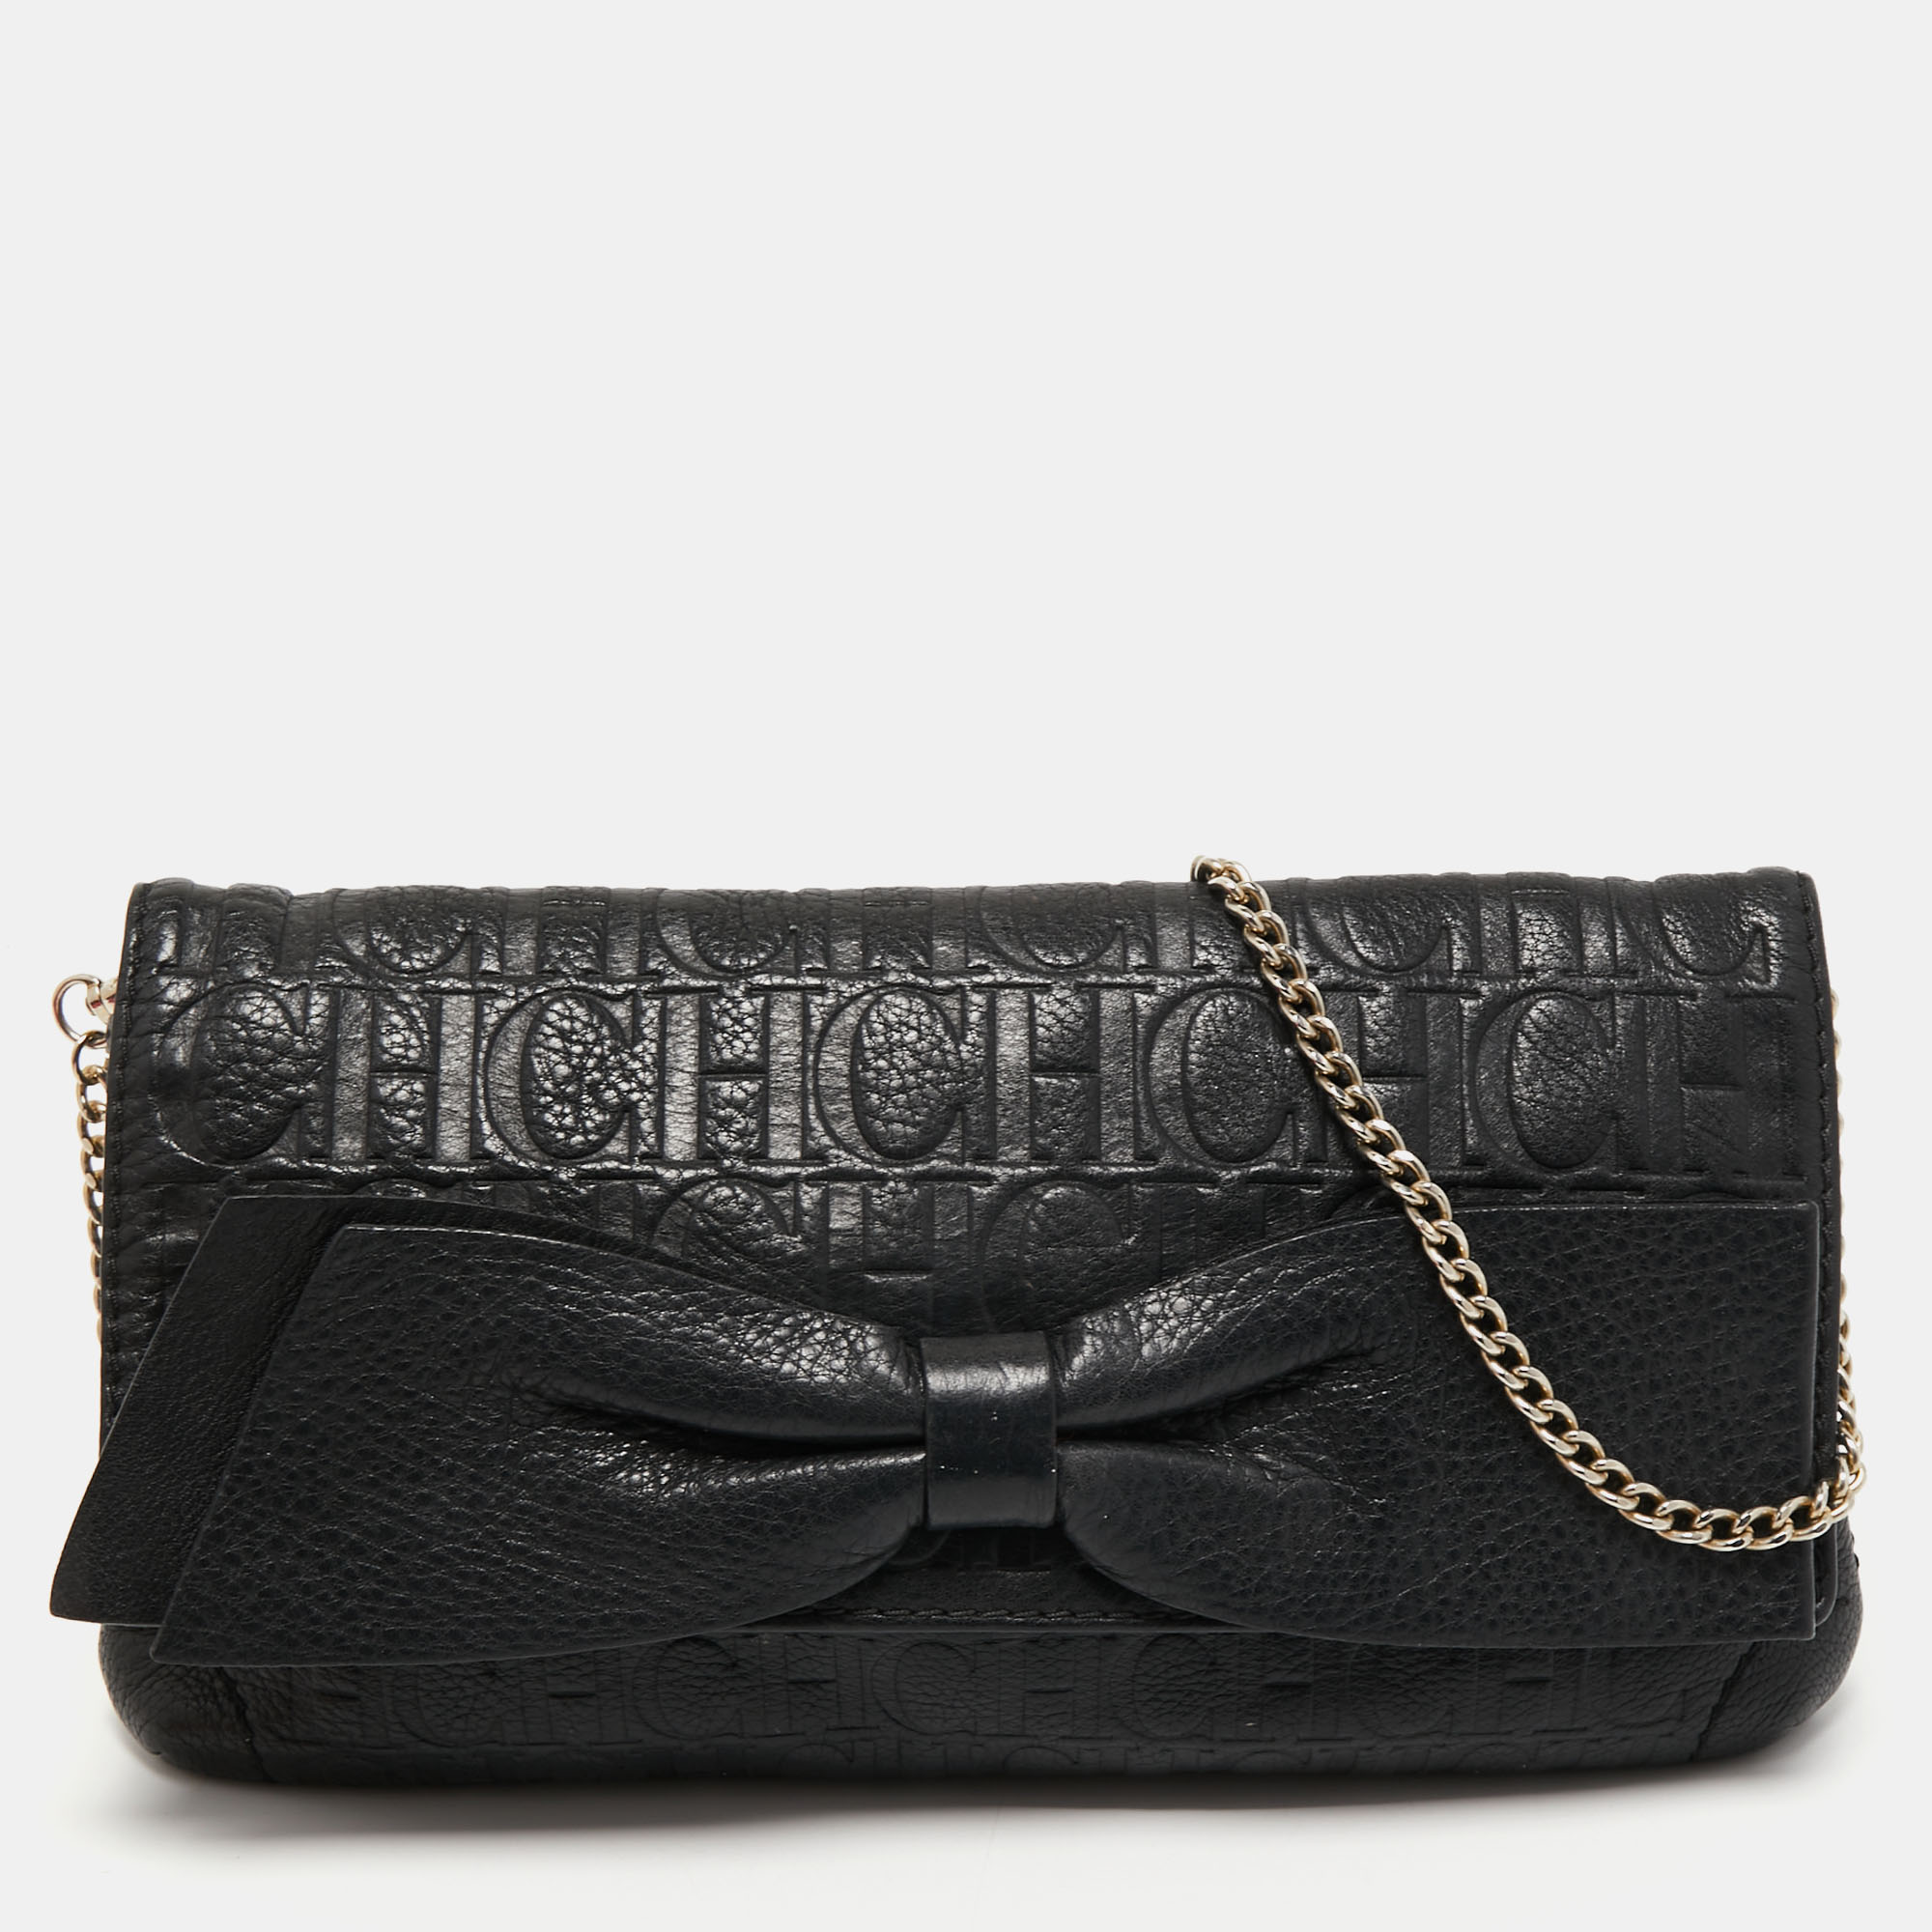 CH CAROLINA HERRERA Pre-owned Black Monogram Embossed Leather Bow Chain Clutch